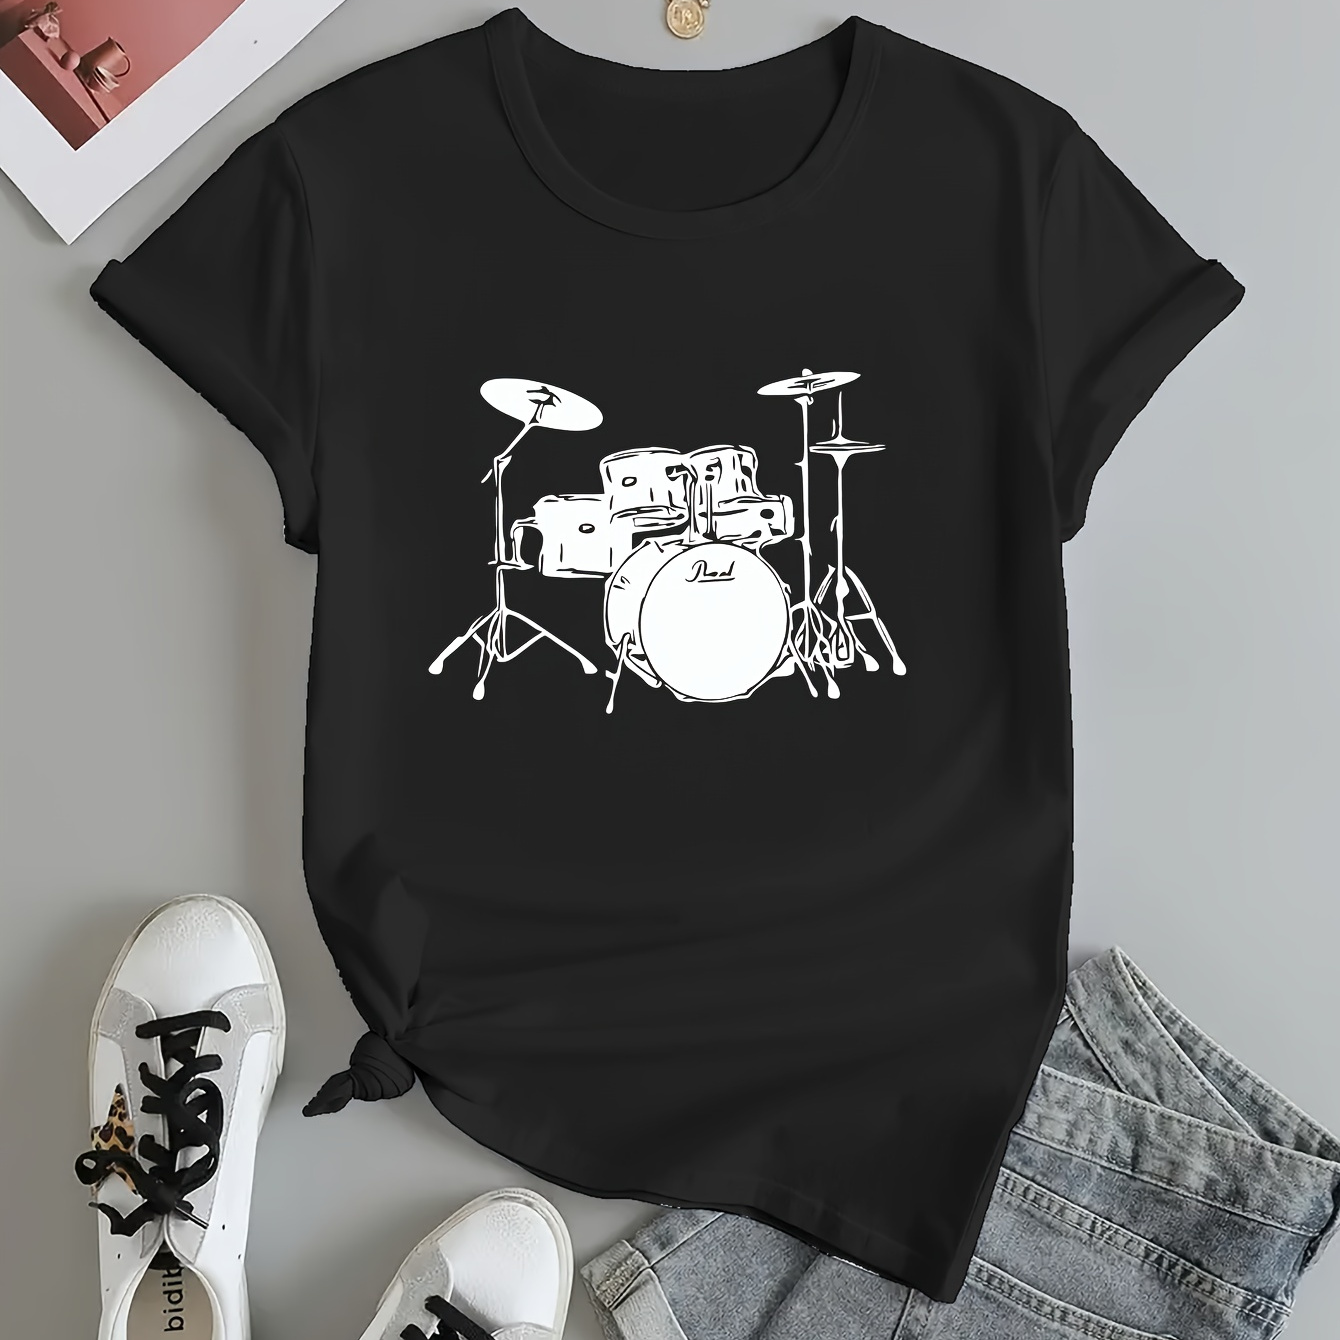 

Drum Print Crew Neck T-shirt, Casual Short Sleeve T-shirt For Spring & Summer, Women's Clothing